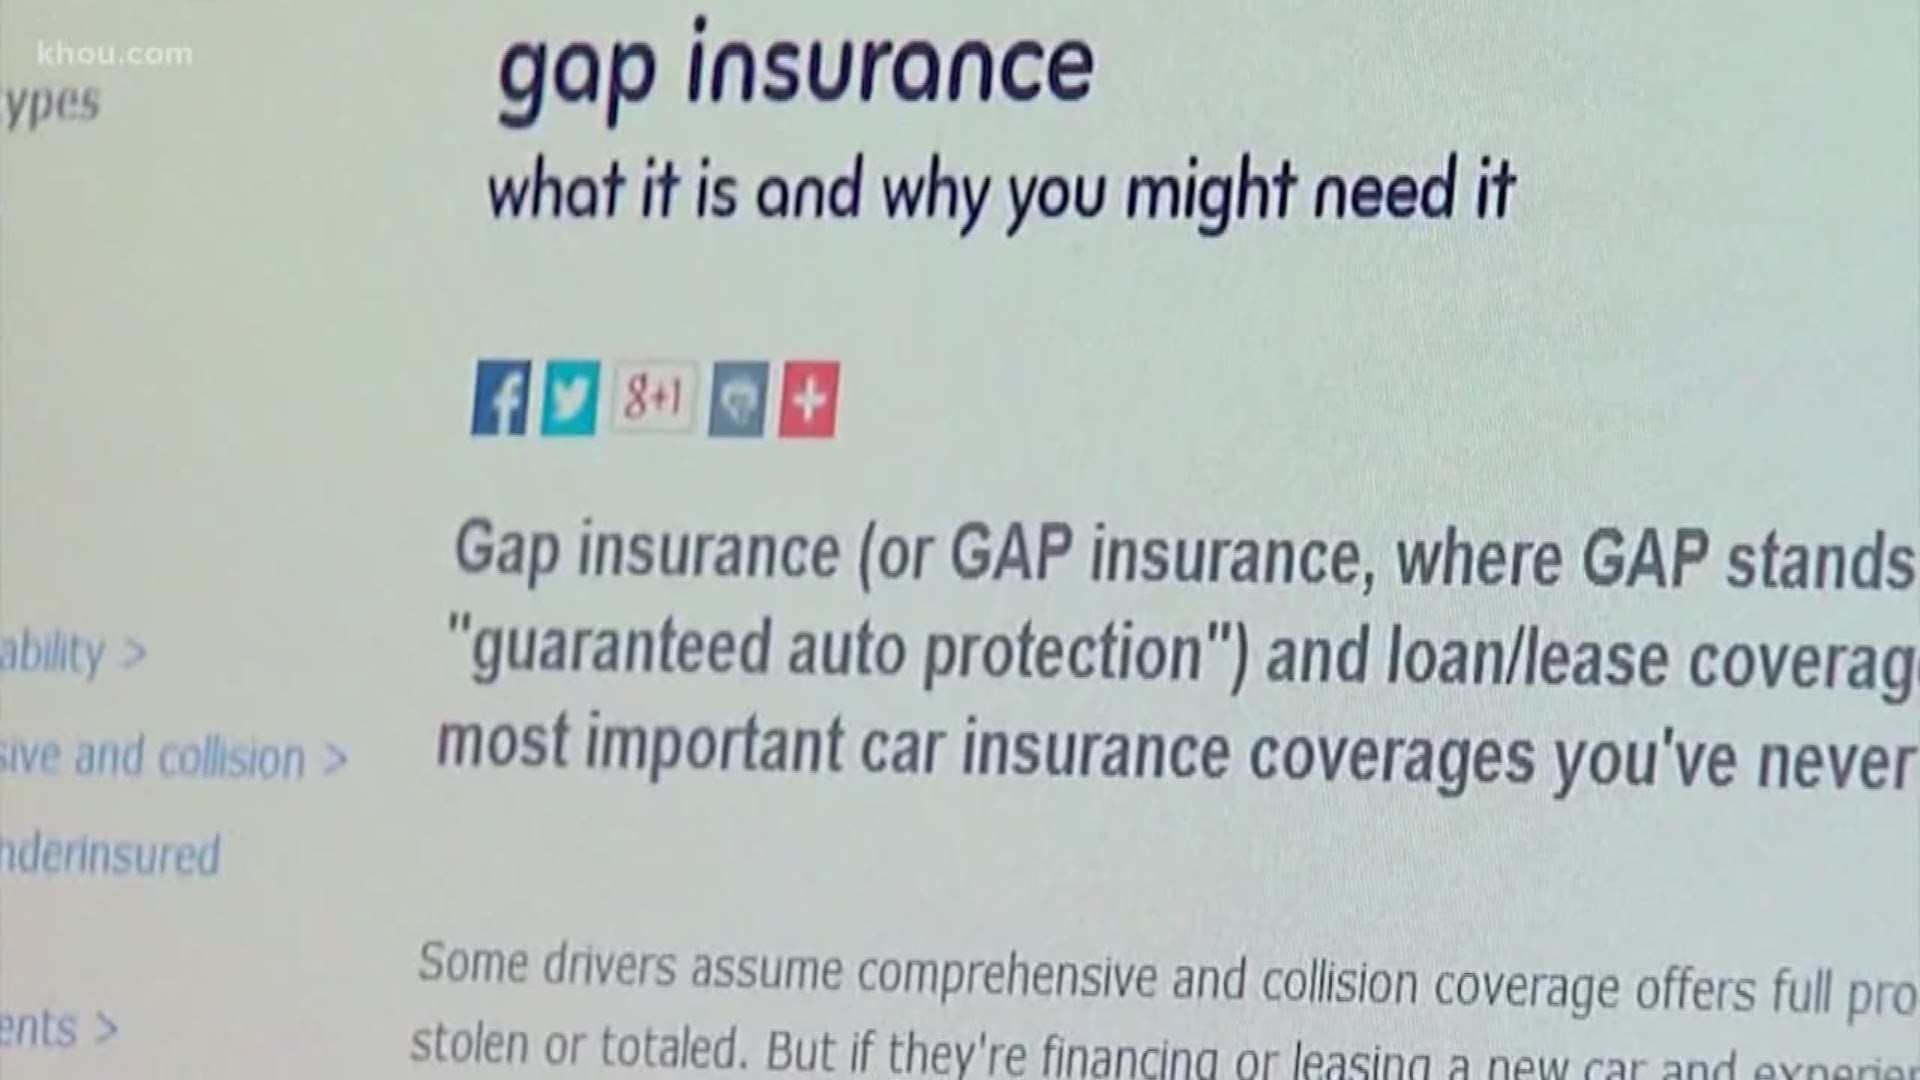 Has a car dealer ever pitched you gap insurance? It's designed to protect you, if you have a wreck, while still owing a lot of money on that car. But consumer reporter John Matarese says that insurance may not live up to its promise so you don't waste your money.